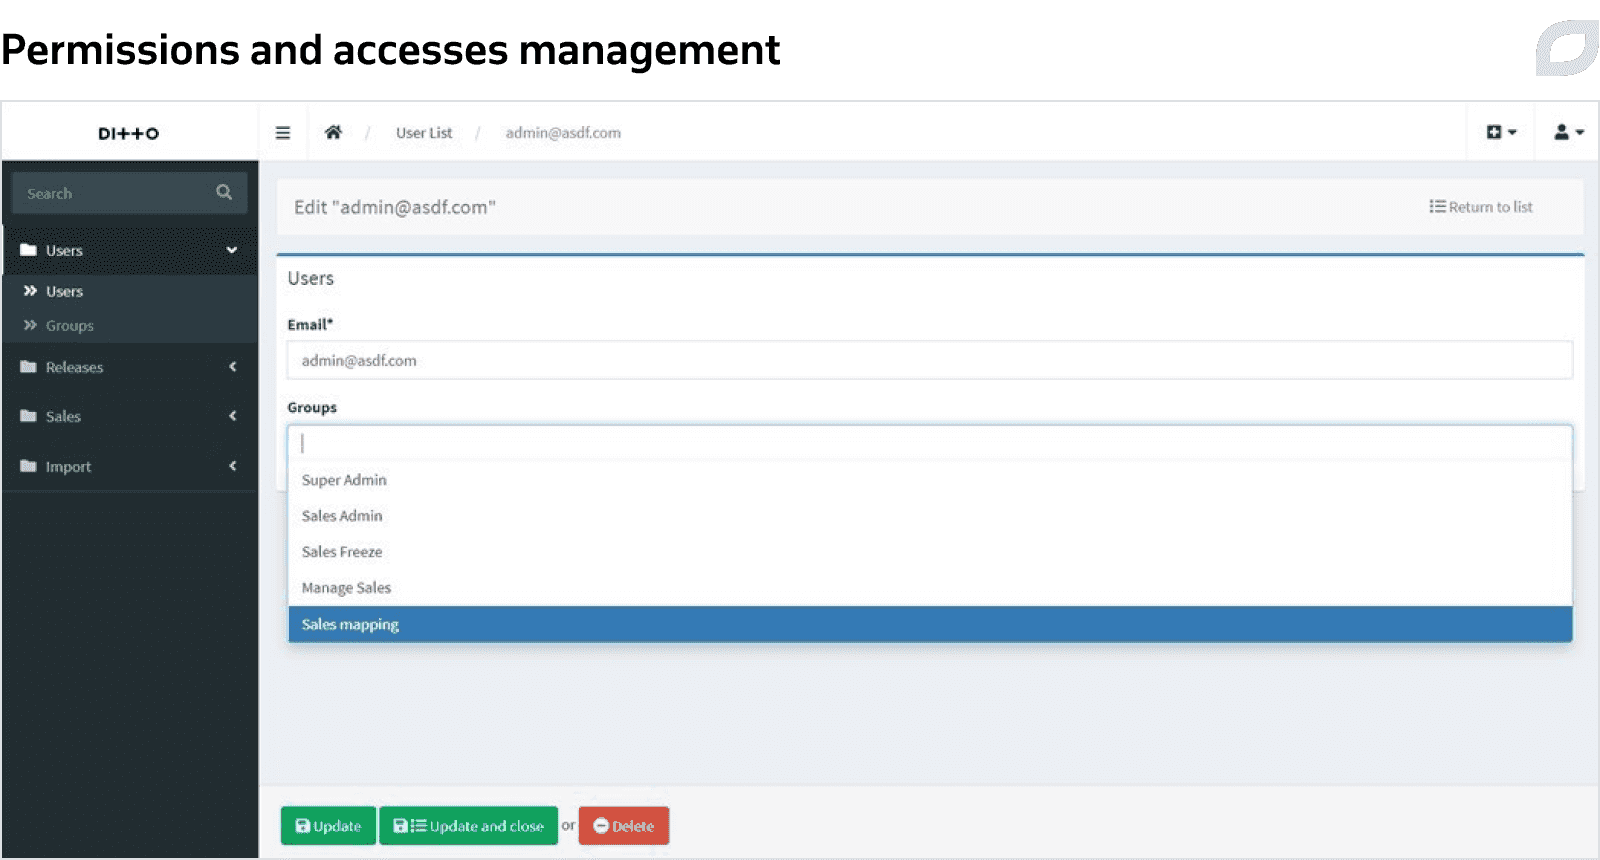 Permissions and accesses management